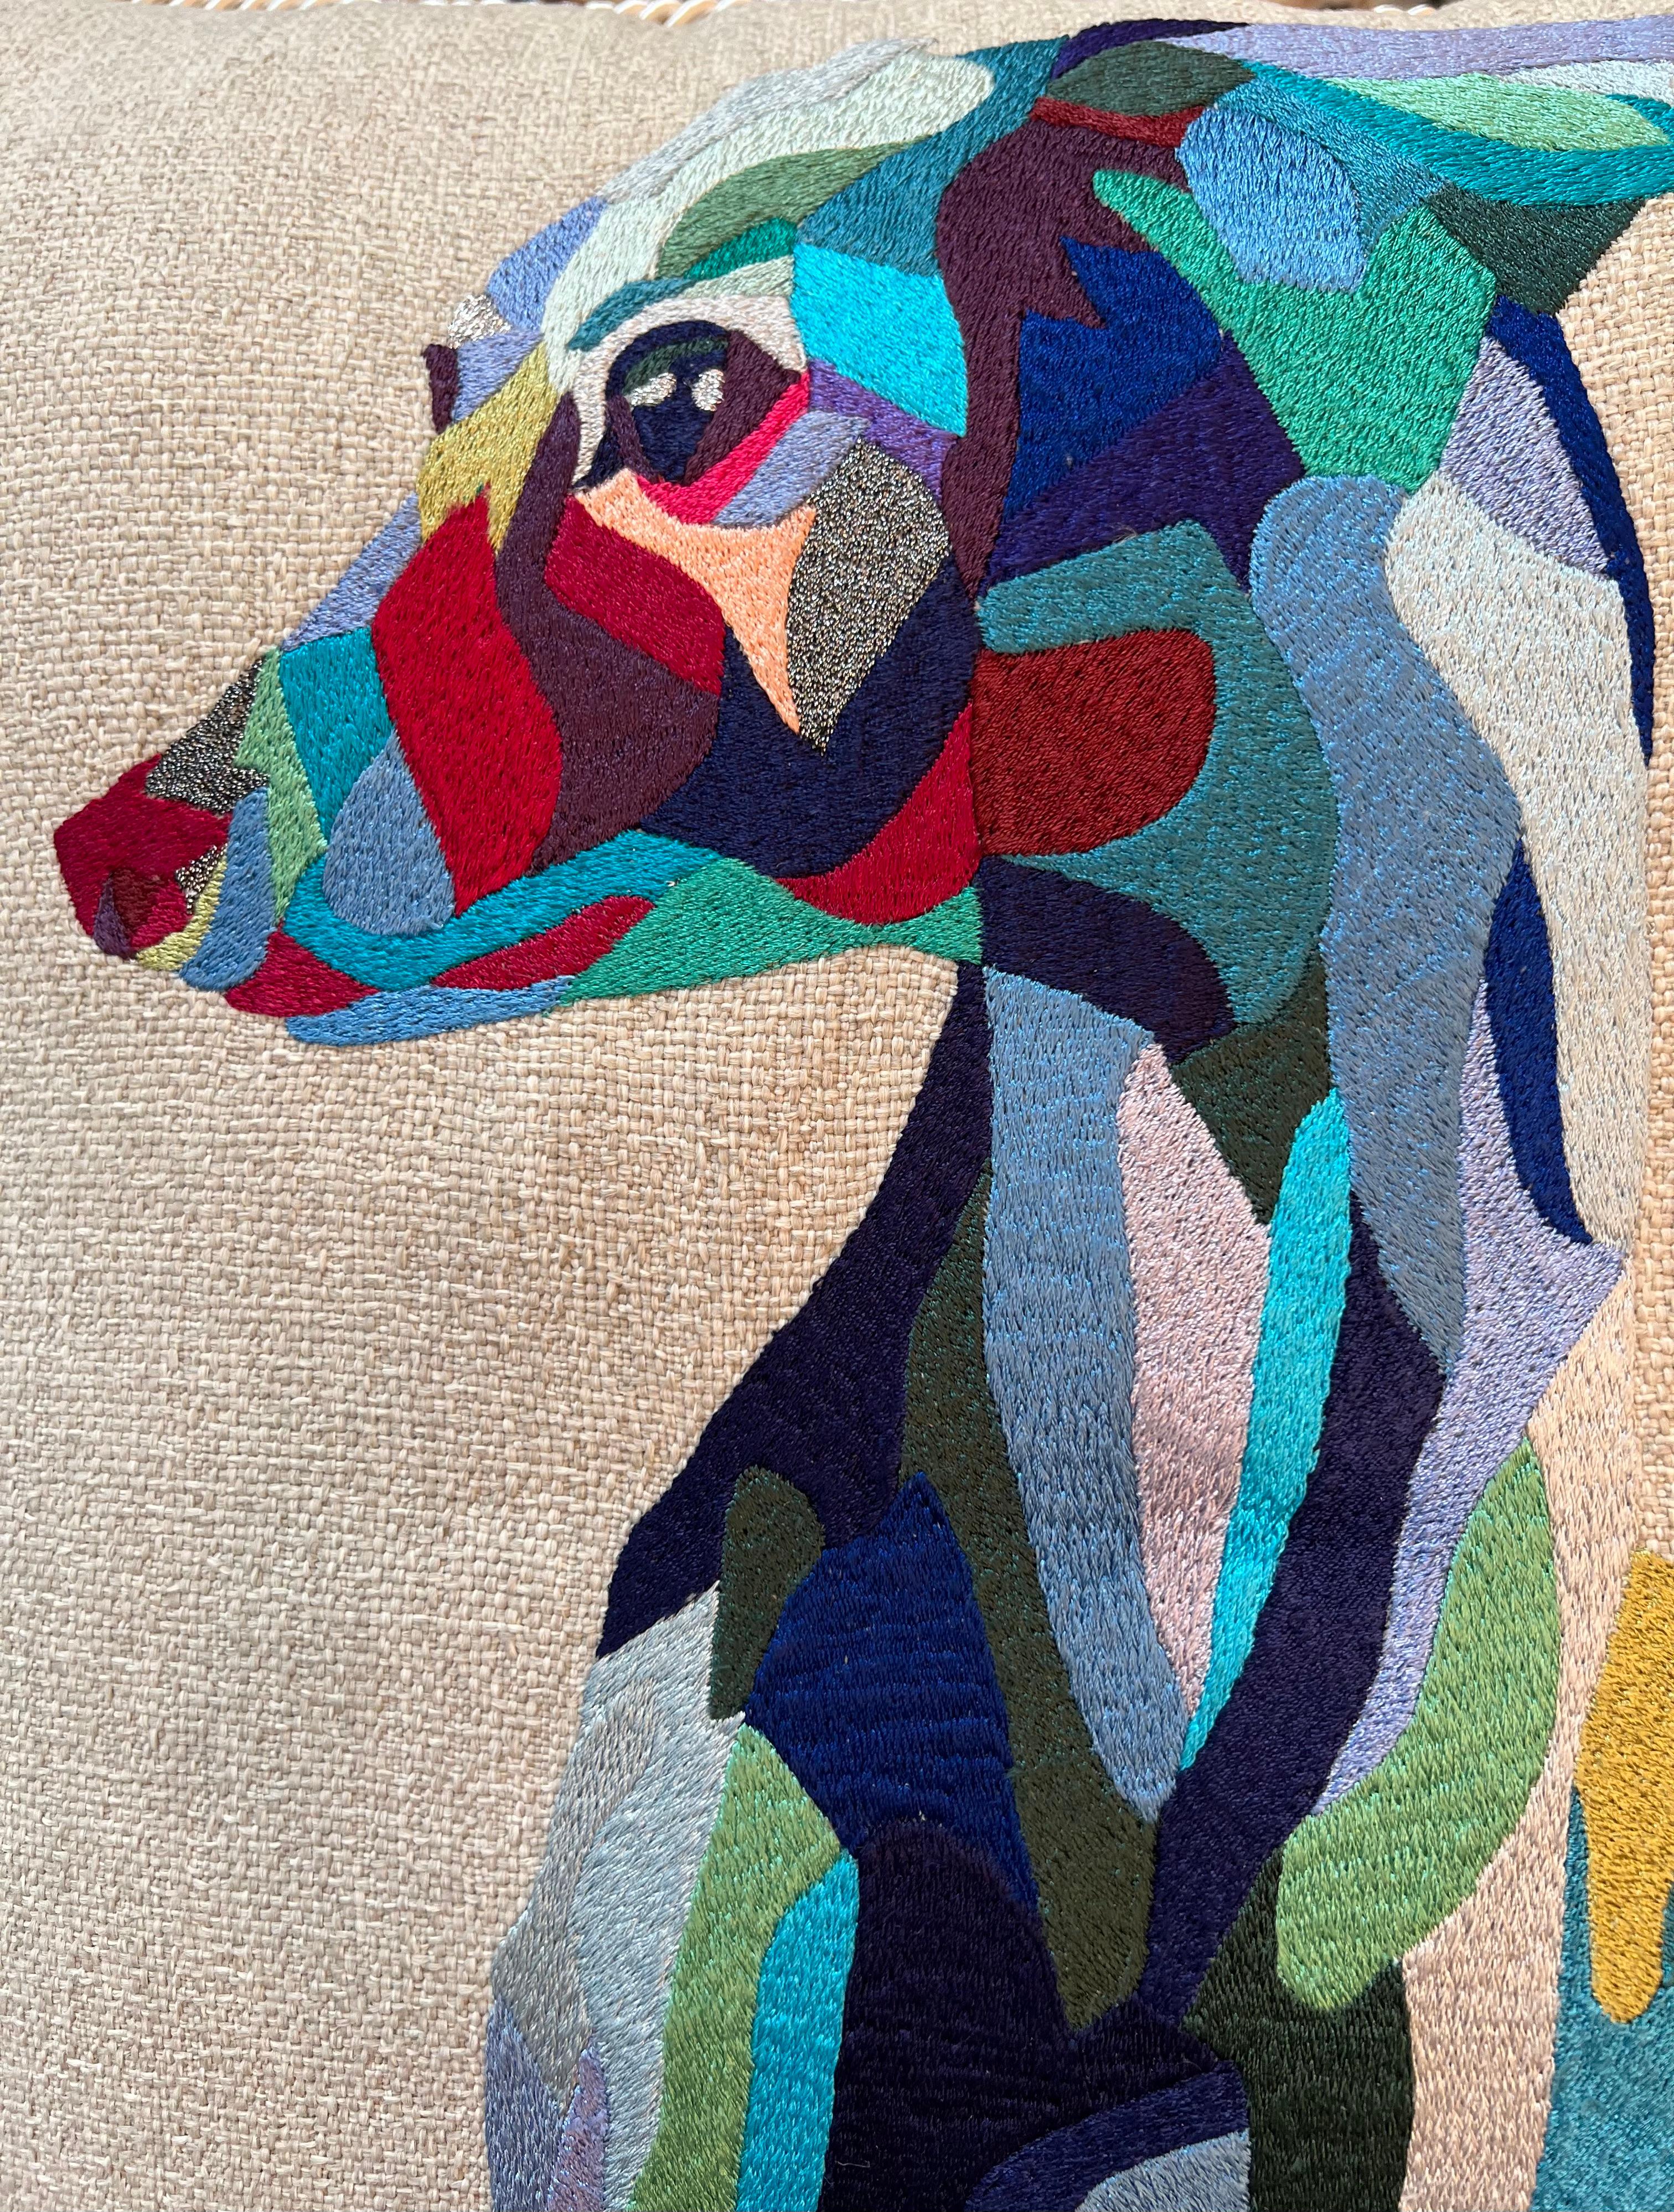 The Italian Greyhound dog, one of my favorite feline subjects, is finely embroidered with colorful silk threads: rich blue tones are assembled into a dynamic and edgy portrait on natural cotton fabric. A tonal twisted piping finishes the edges.